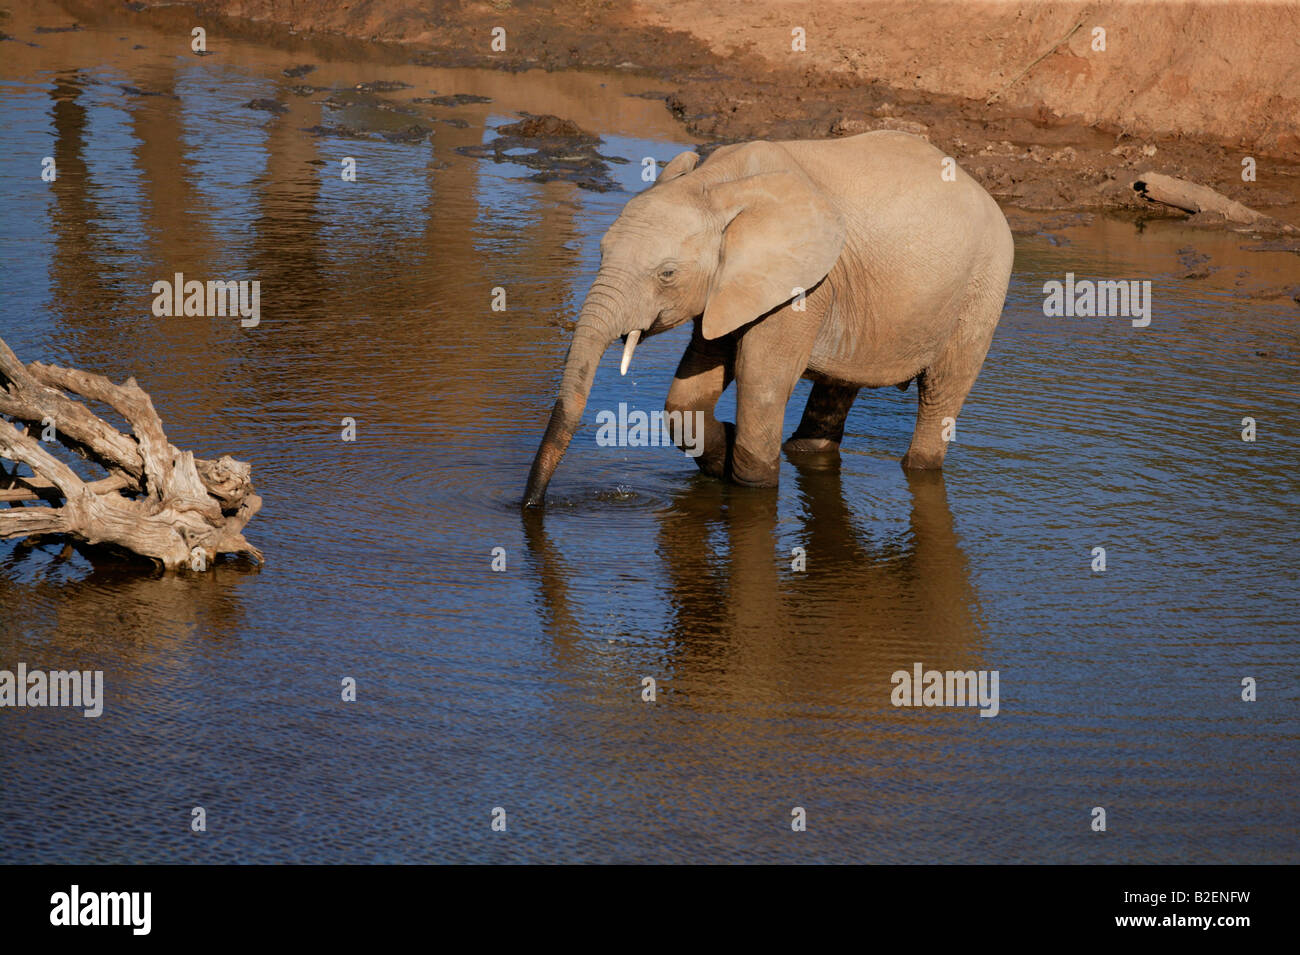 A lone dusty elephant drinking water standing in the shallow water of a waterhole Stock Photo